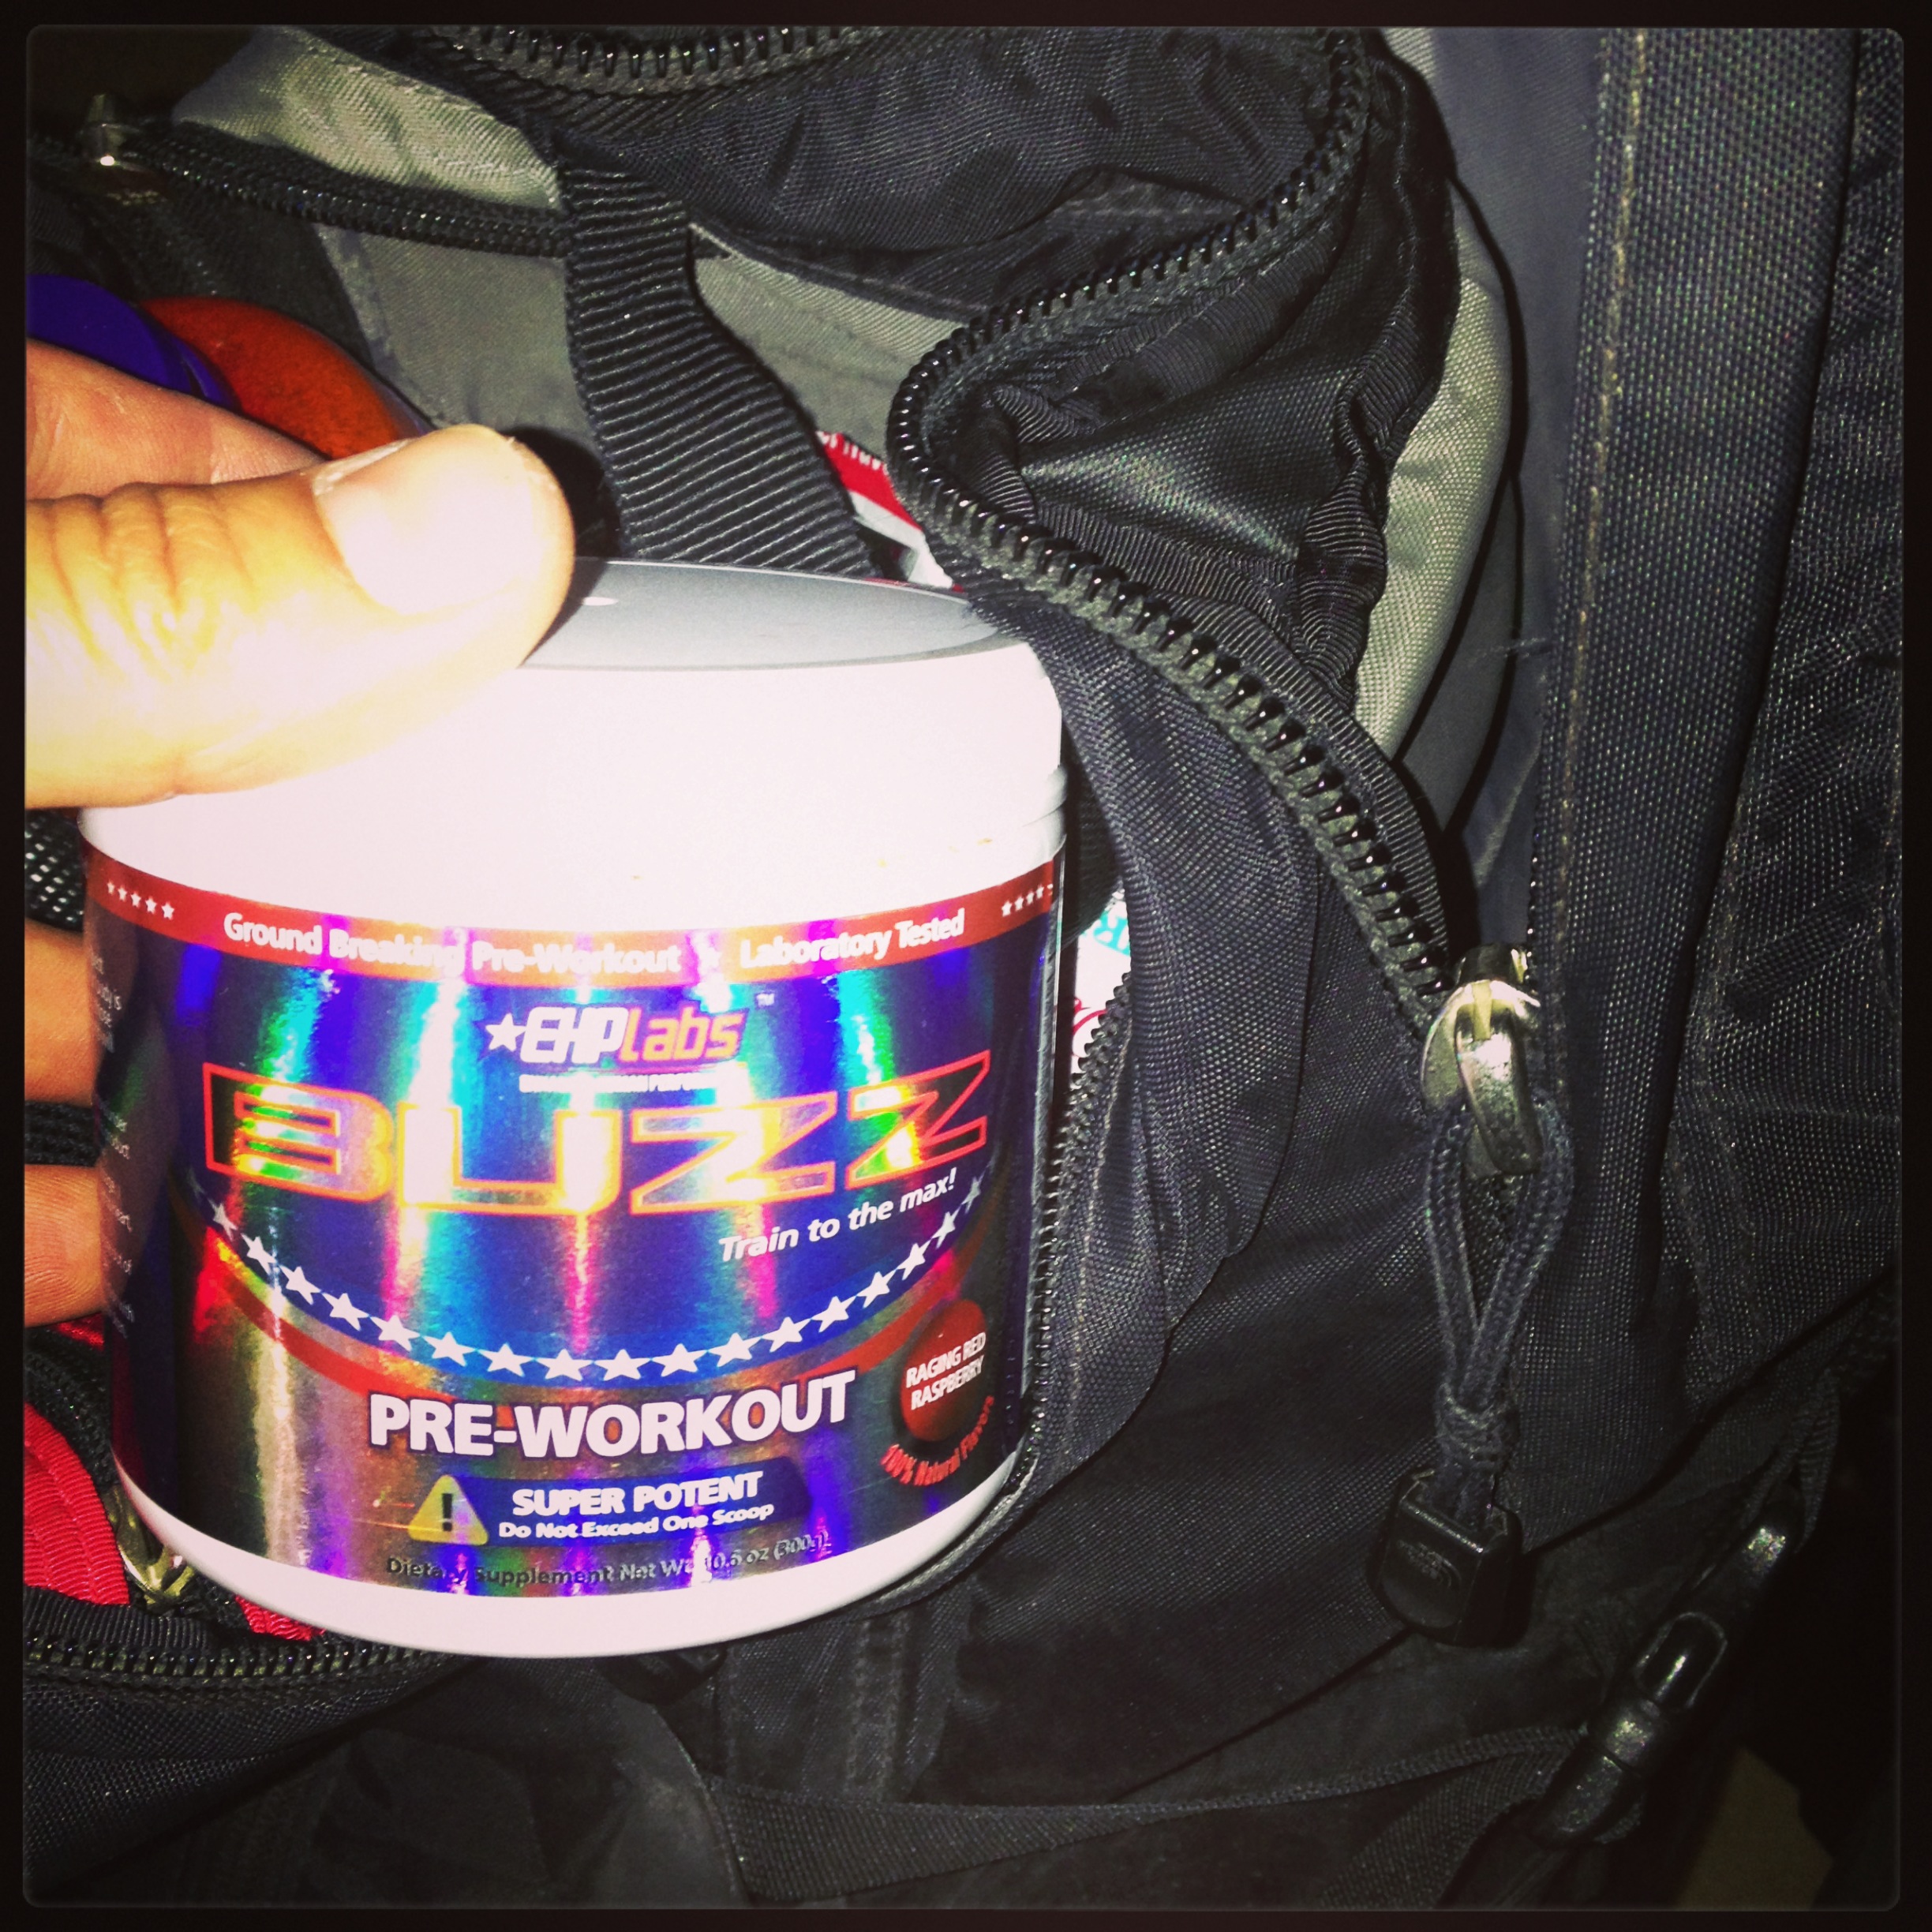 Get your Buzz Pre-Workout on!